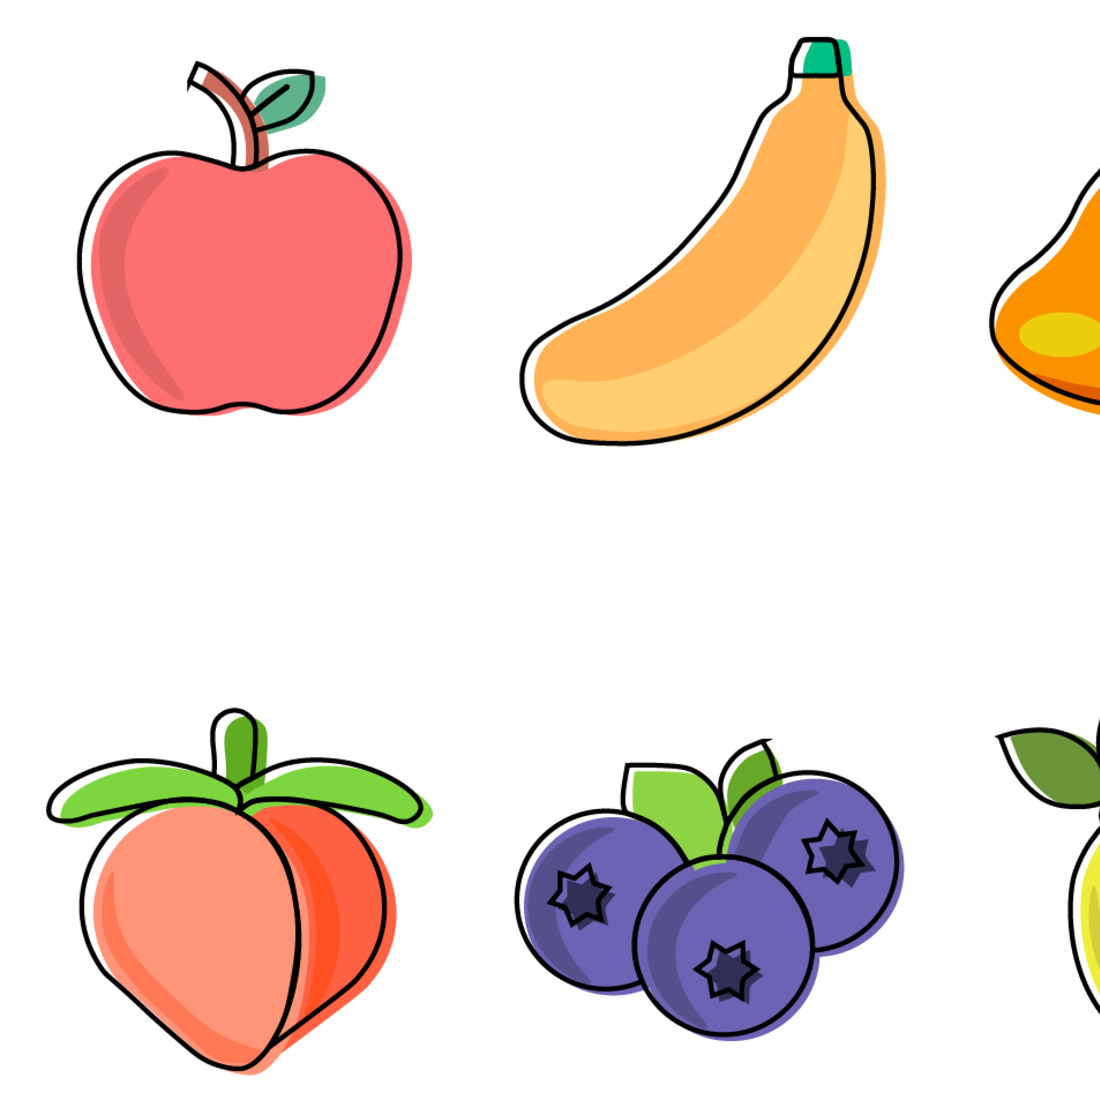 10 Fruit Food Line Icons Design main cover.